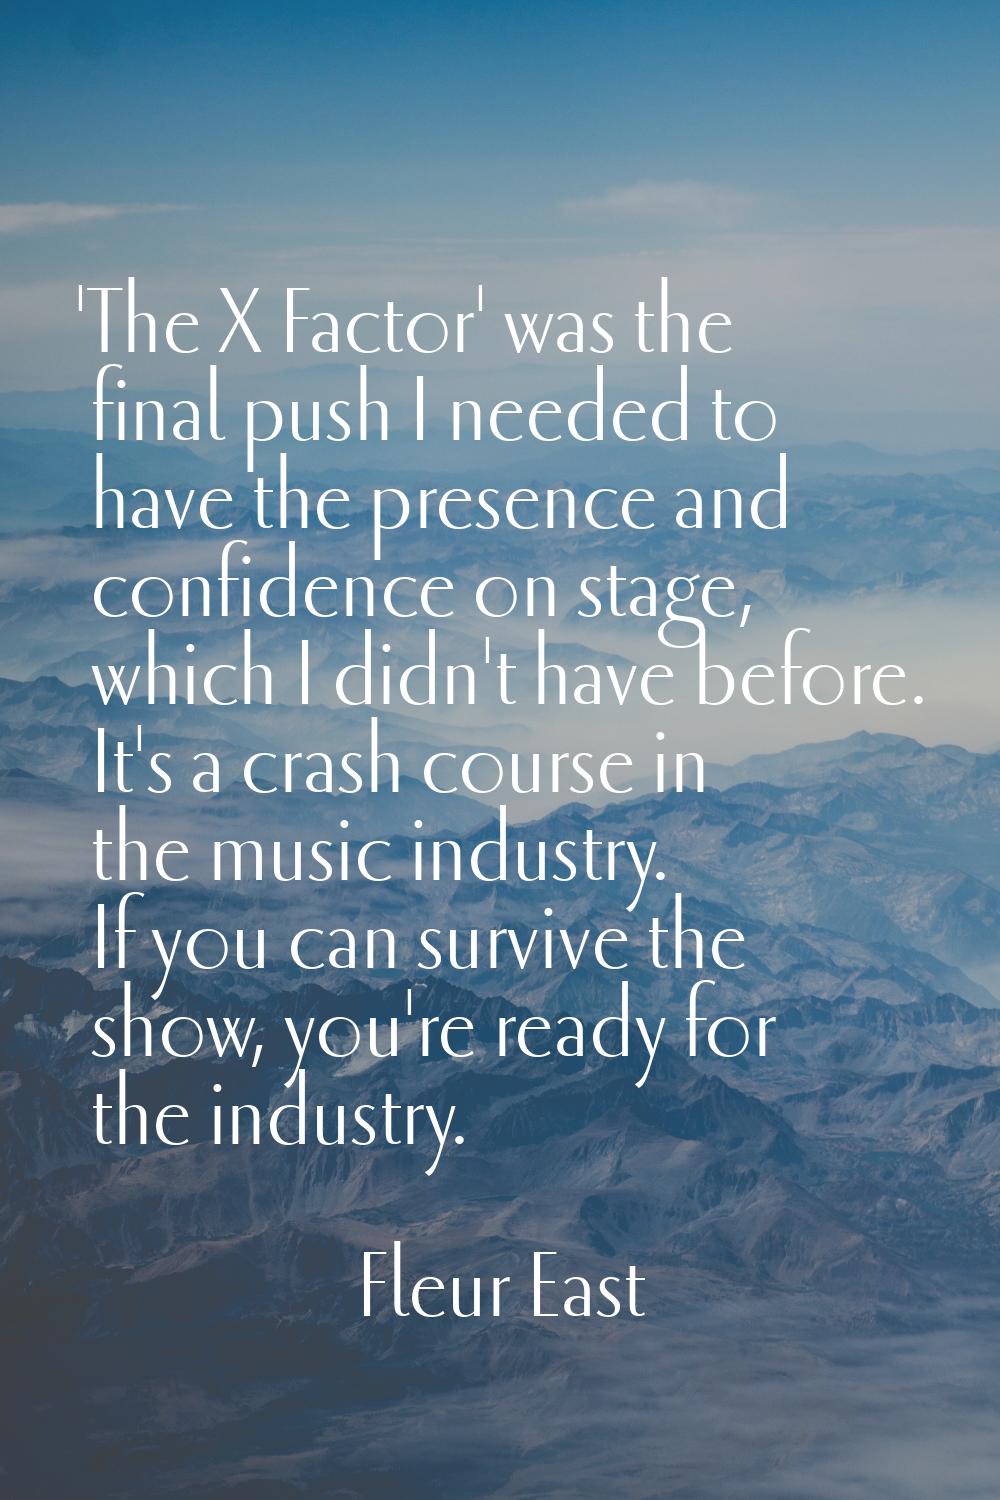 'The X Factor' was the final push I needed to have the presence and confidence on stage, which I di